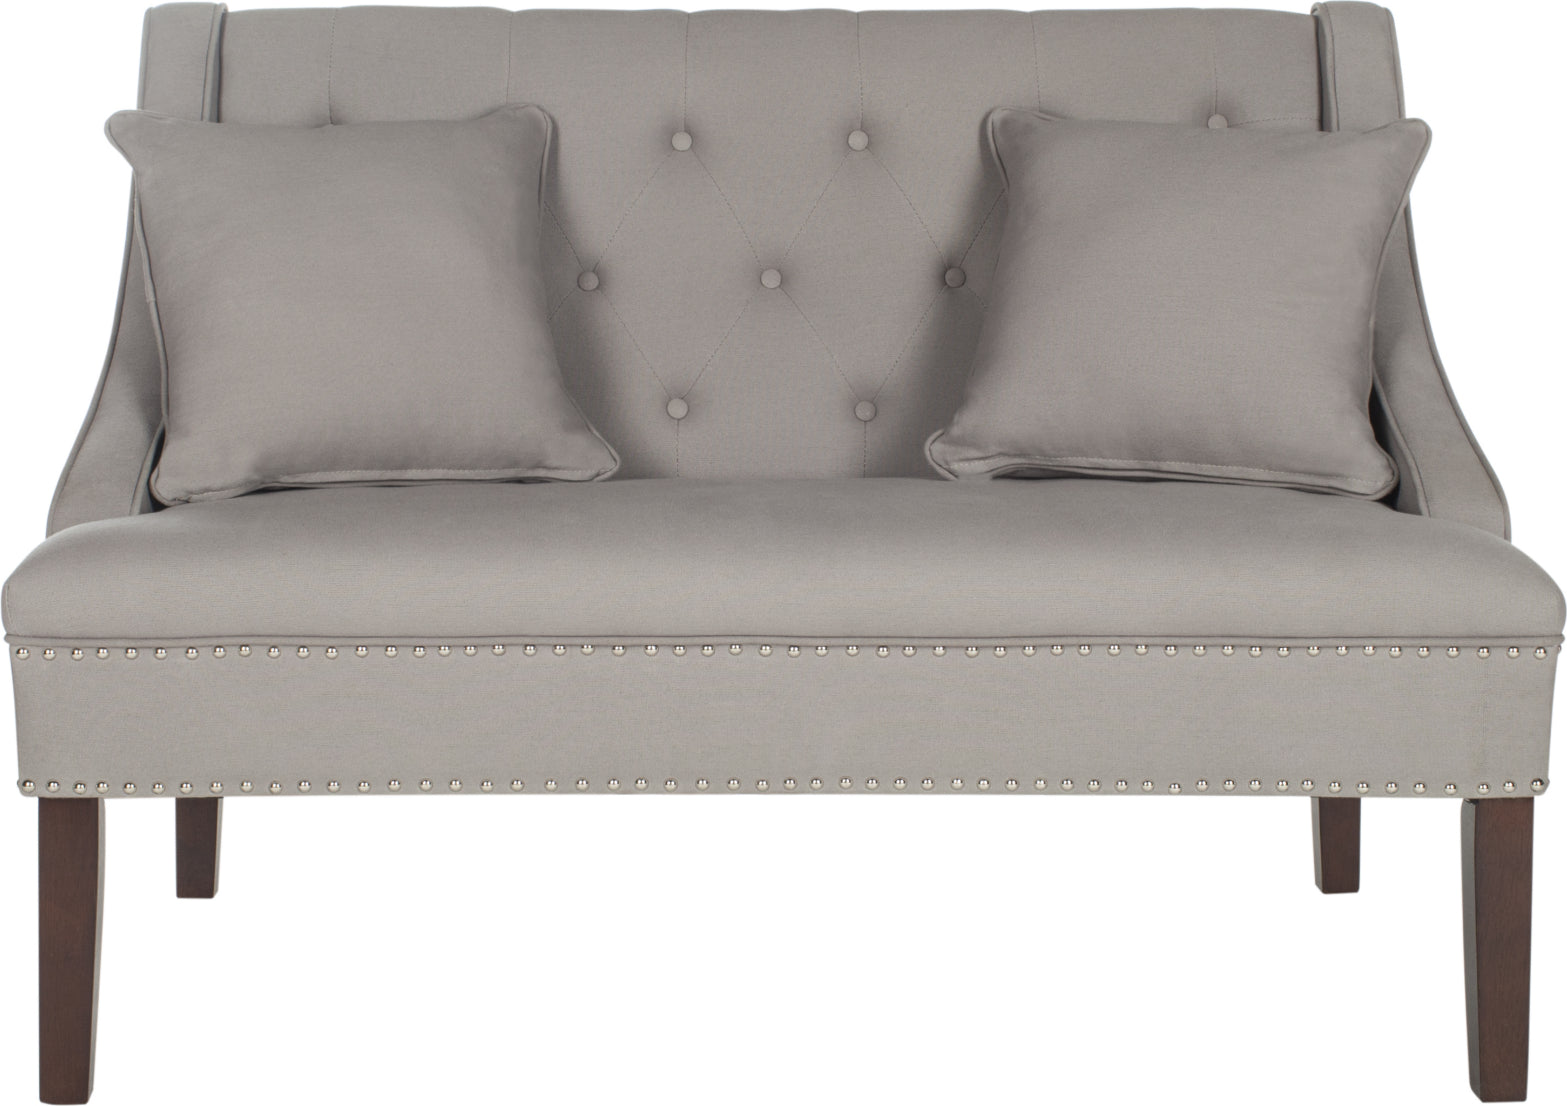 Safavieh Zoey Linen Settee With Silver Nailheads Taupe and Espresso Furniture main image